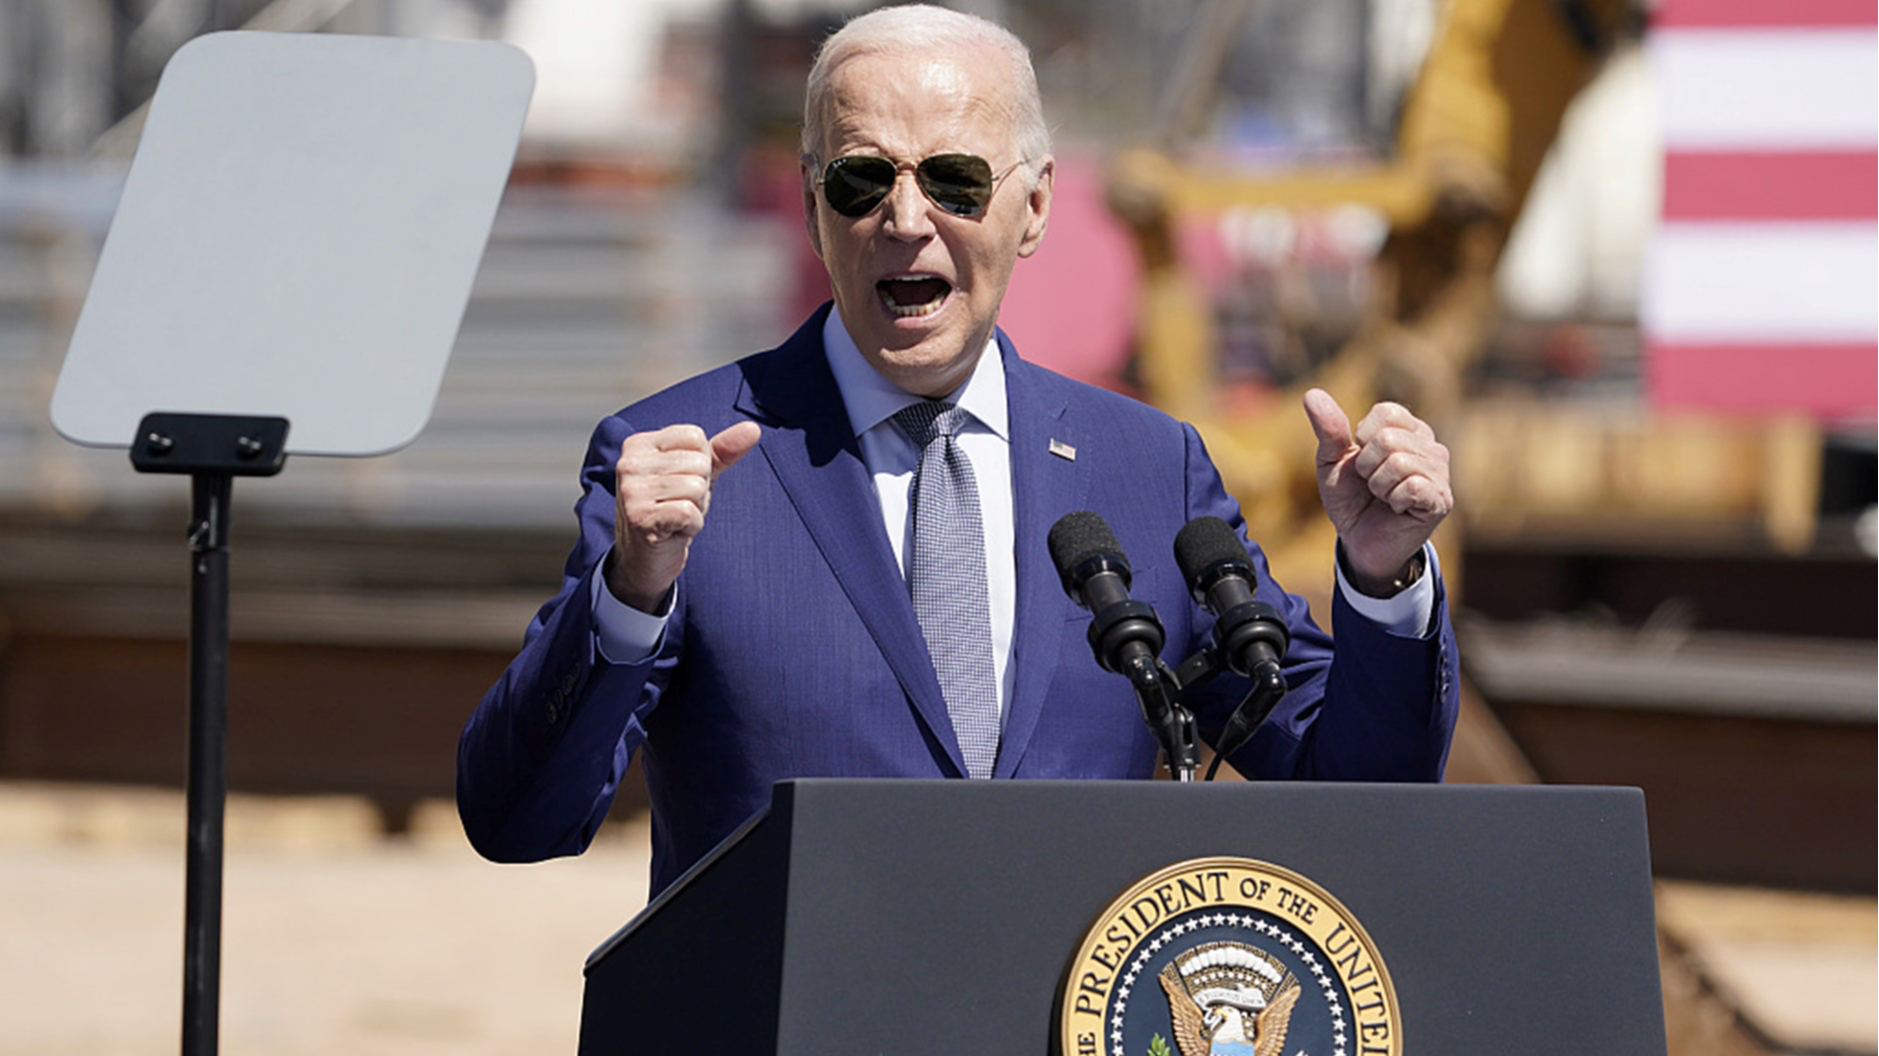 U.S. President Joe Biden speaks about an agreement to provide Intel with up to $8.5 billion in direct funding and $11 billion in loans for computer chip plants in Arizona, Ohio, New Mexico and Oregon, at the Intel Ocotillo Campus in Chandler, Arizona, March 20, 2024. /CFP